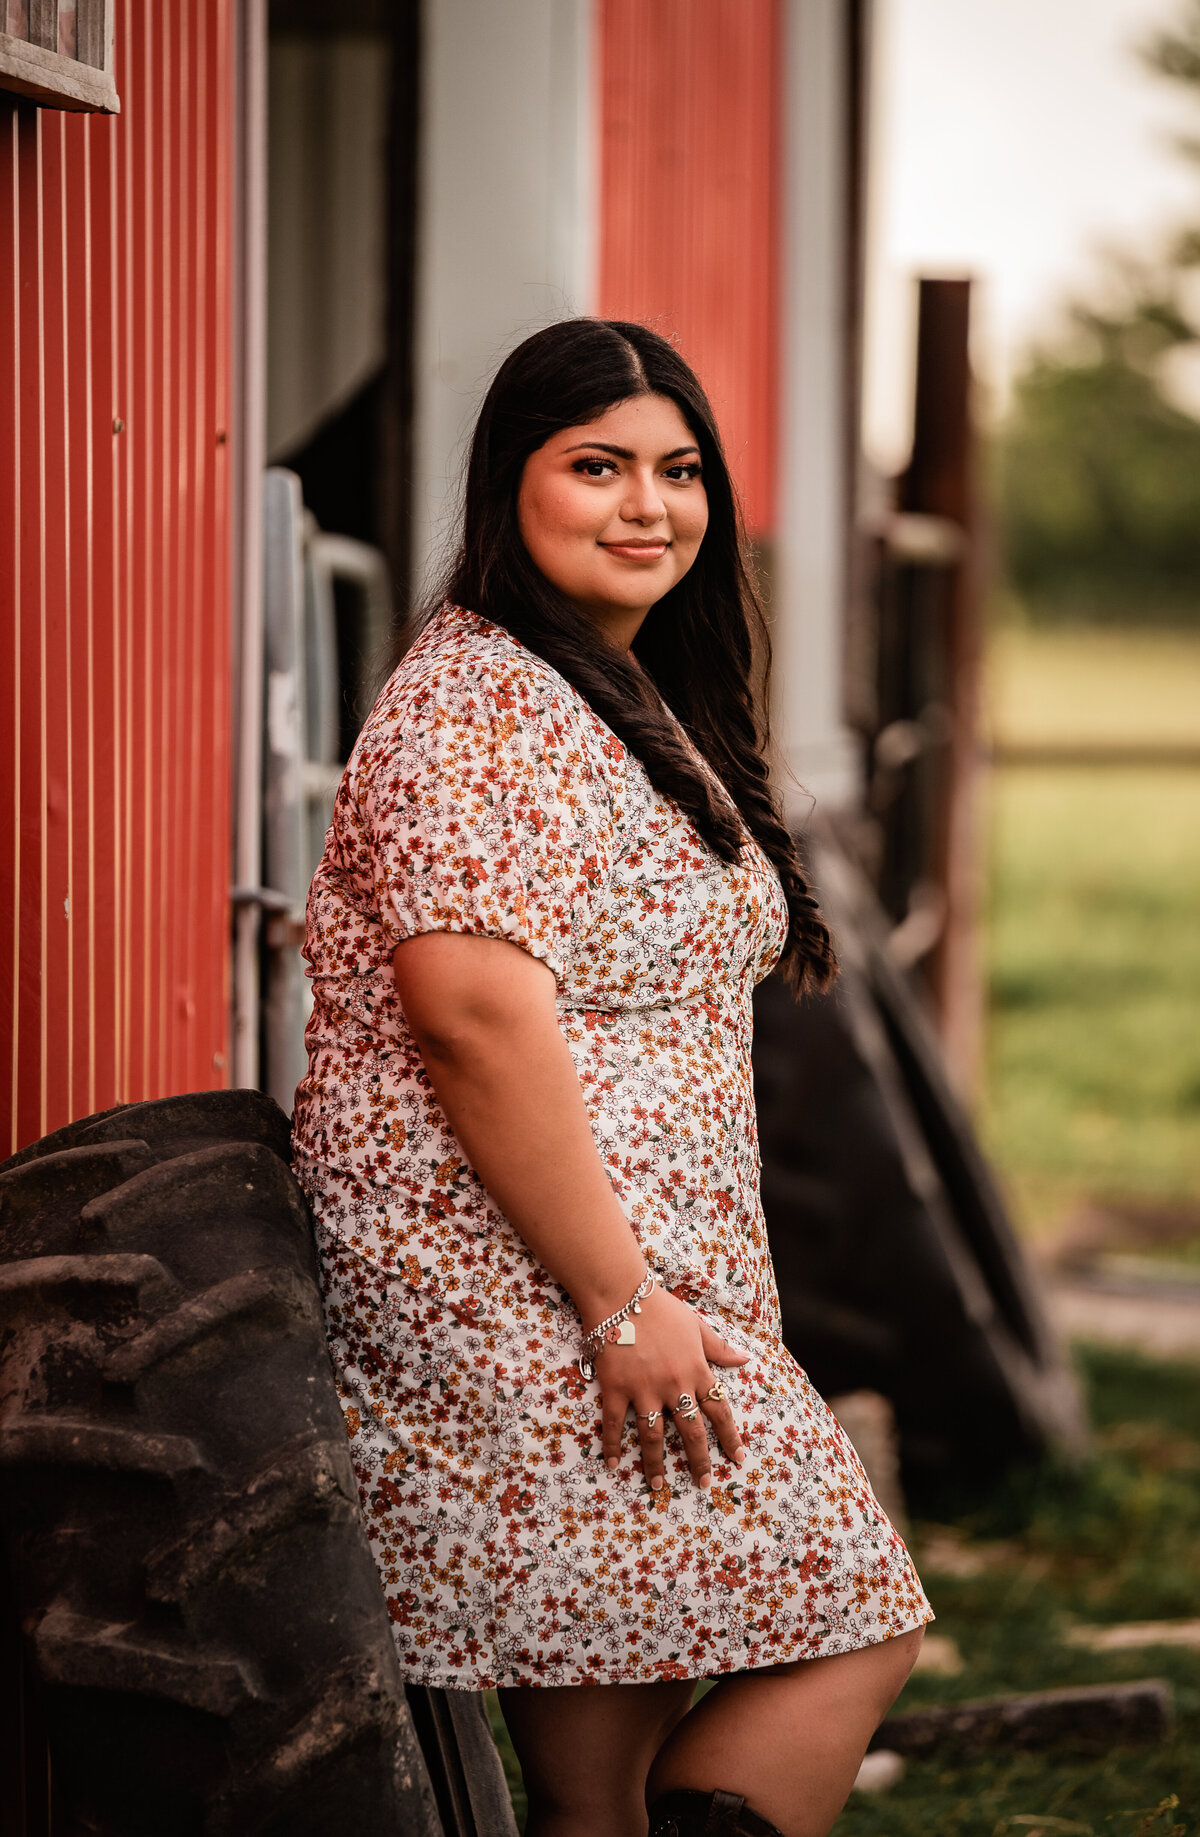 A girl wearing a floral dress leans against a tractor tire and smiles at the camera for her senior portrait.